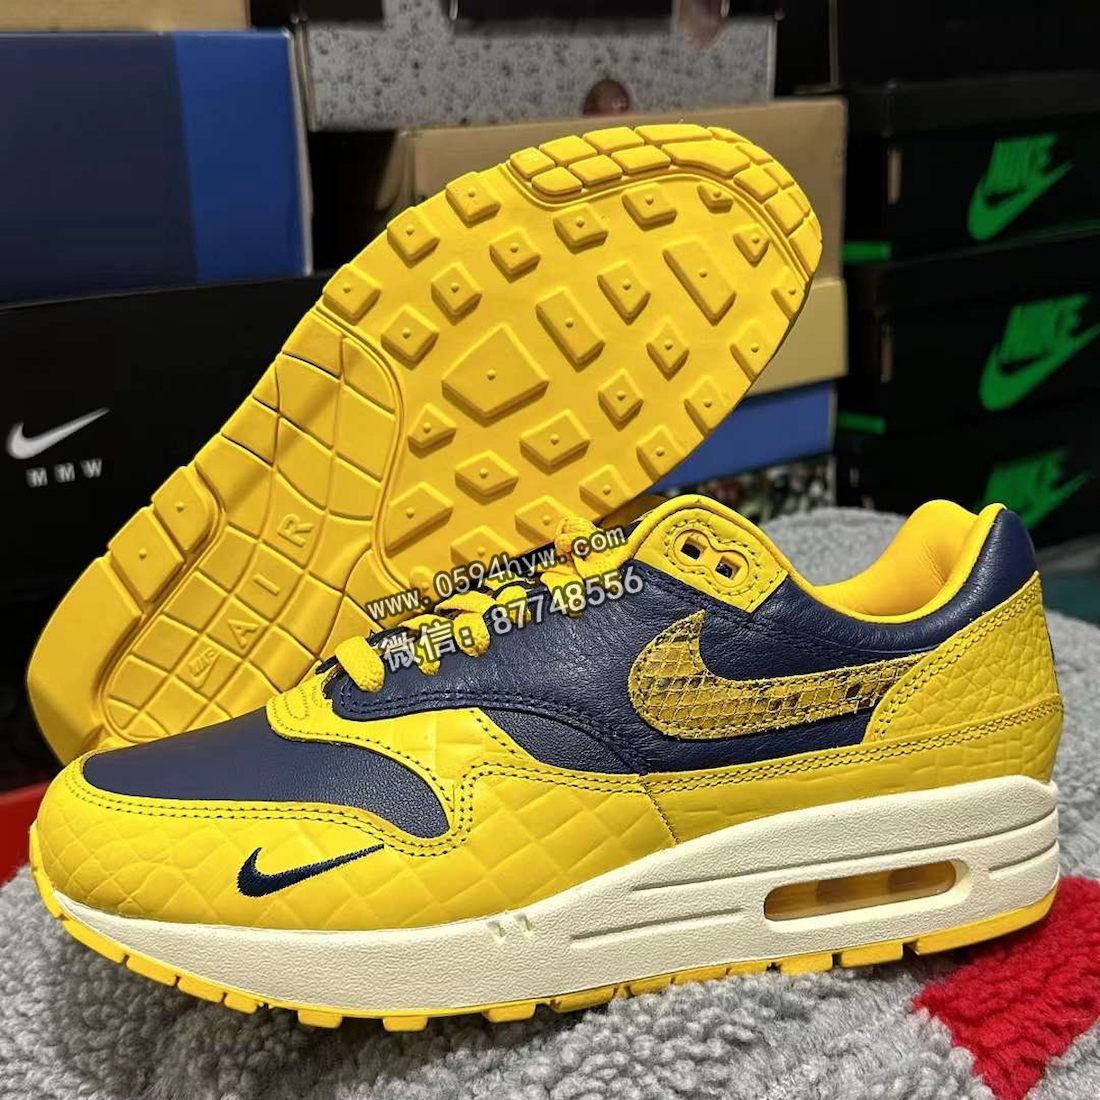 Nike-Air-Max-1-Midnight-Navy-Varsity-Maize-FJ5479-410-Release-Date-3